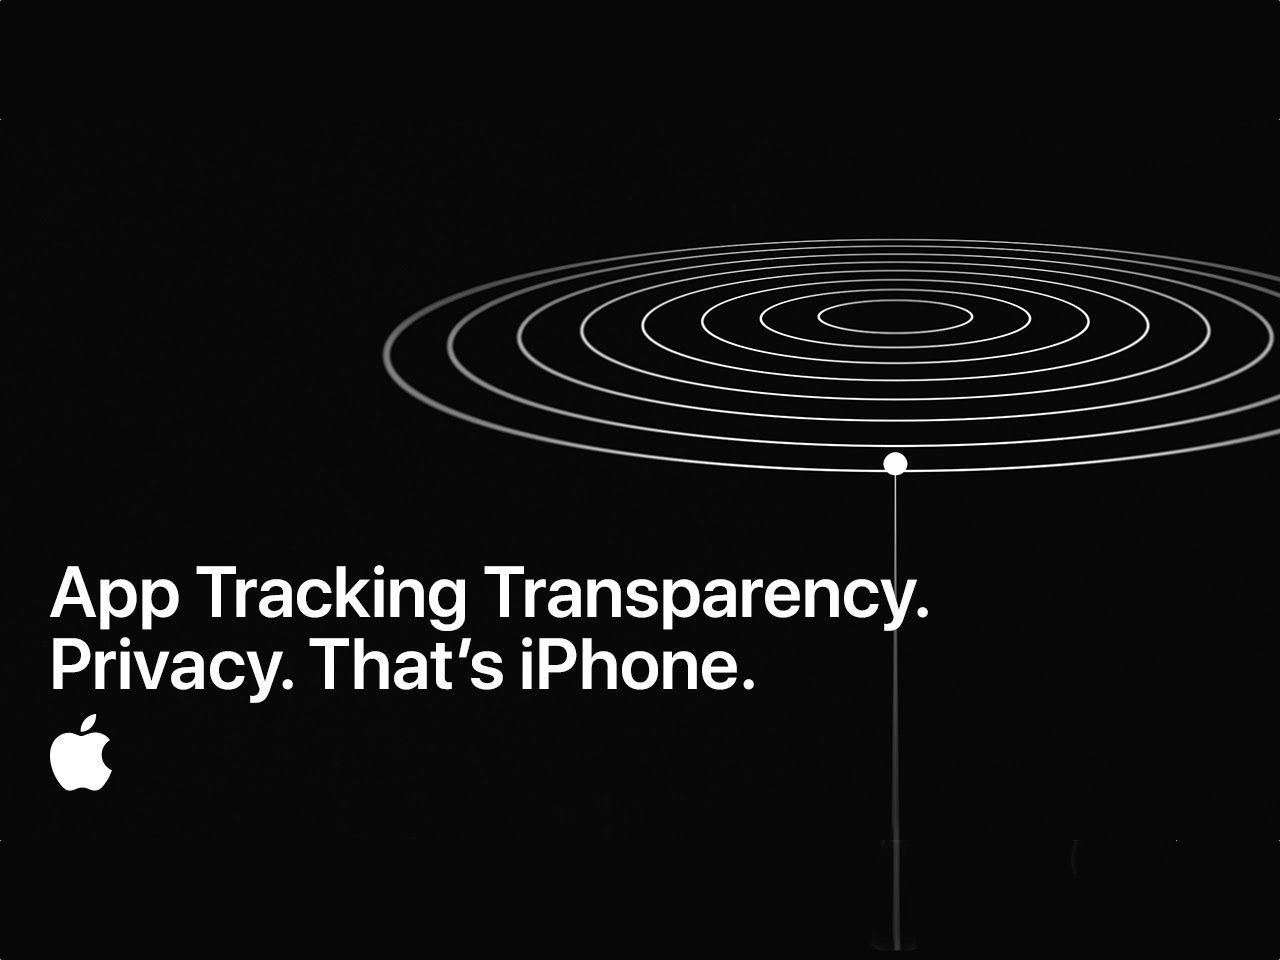 App Tracking Transparency Video